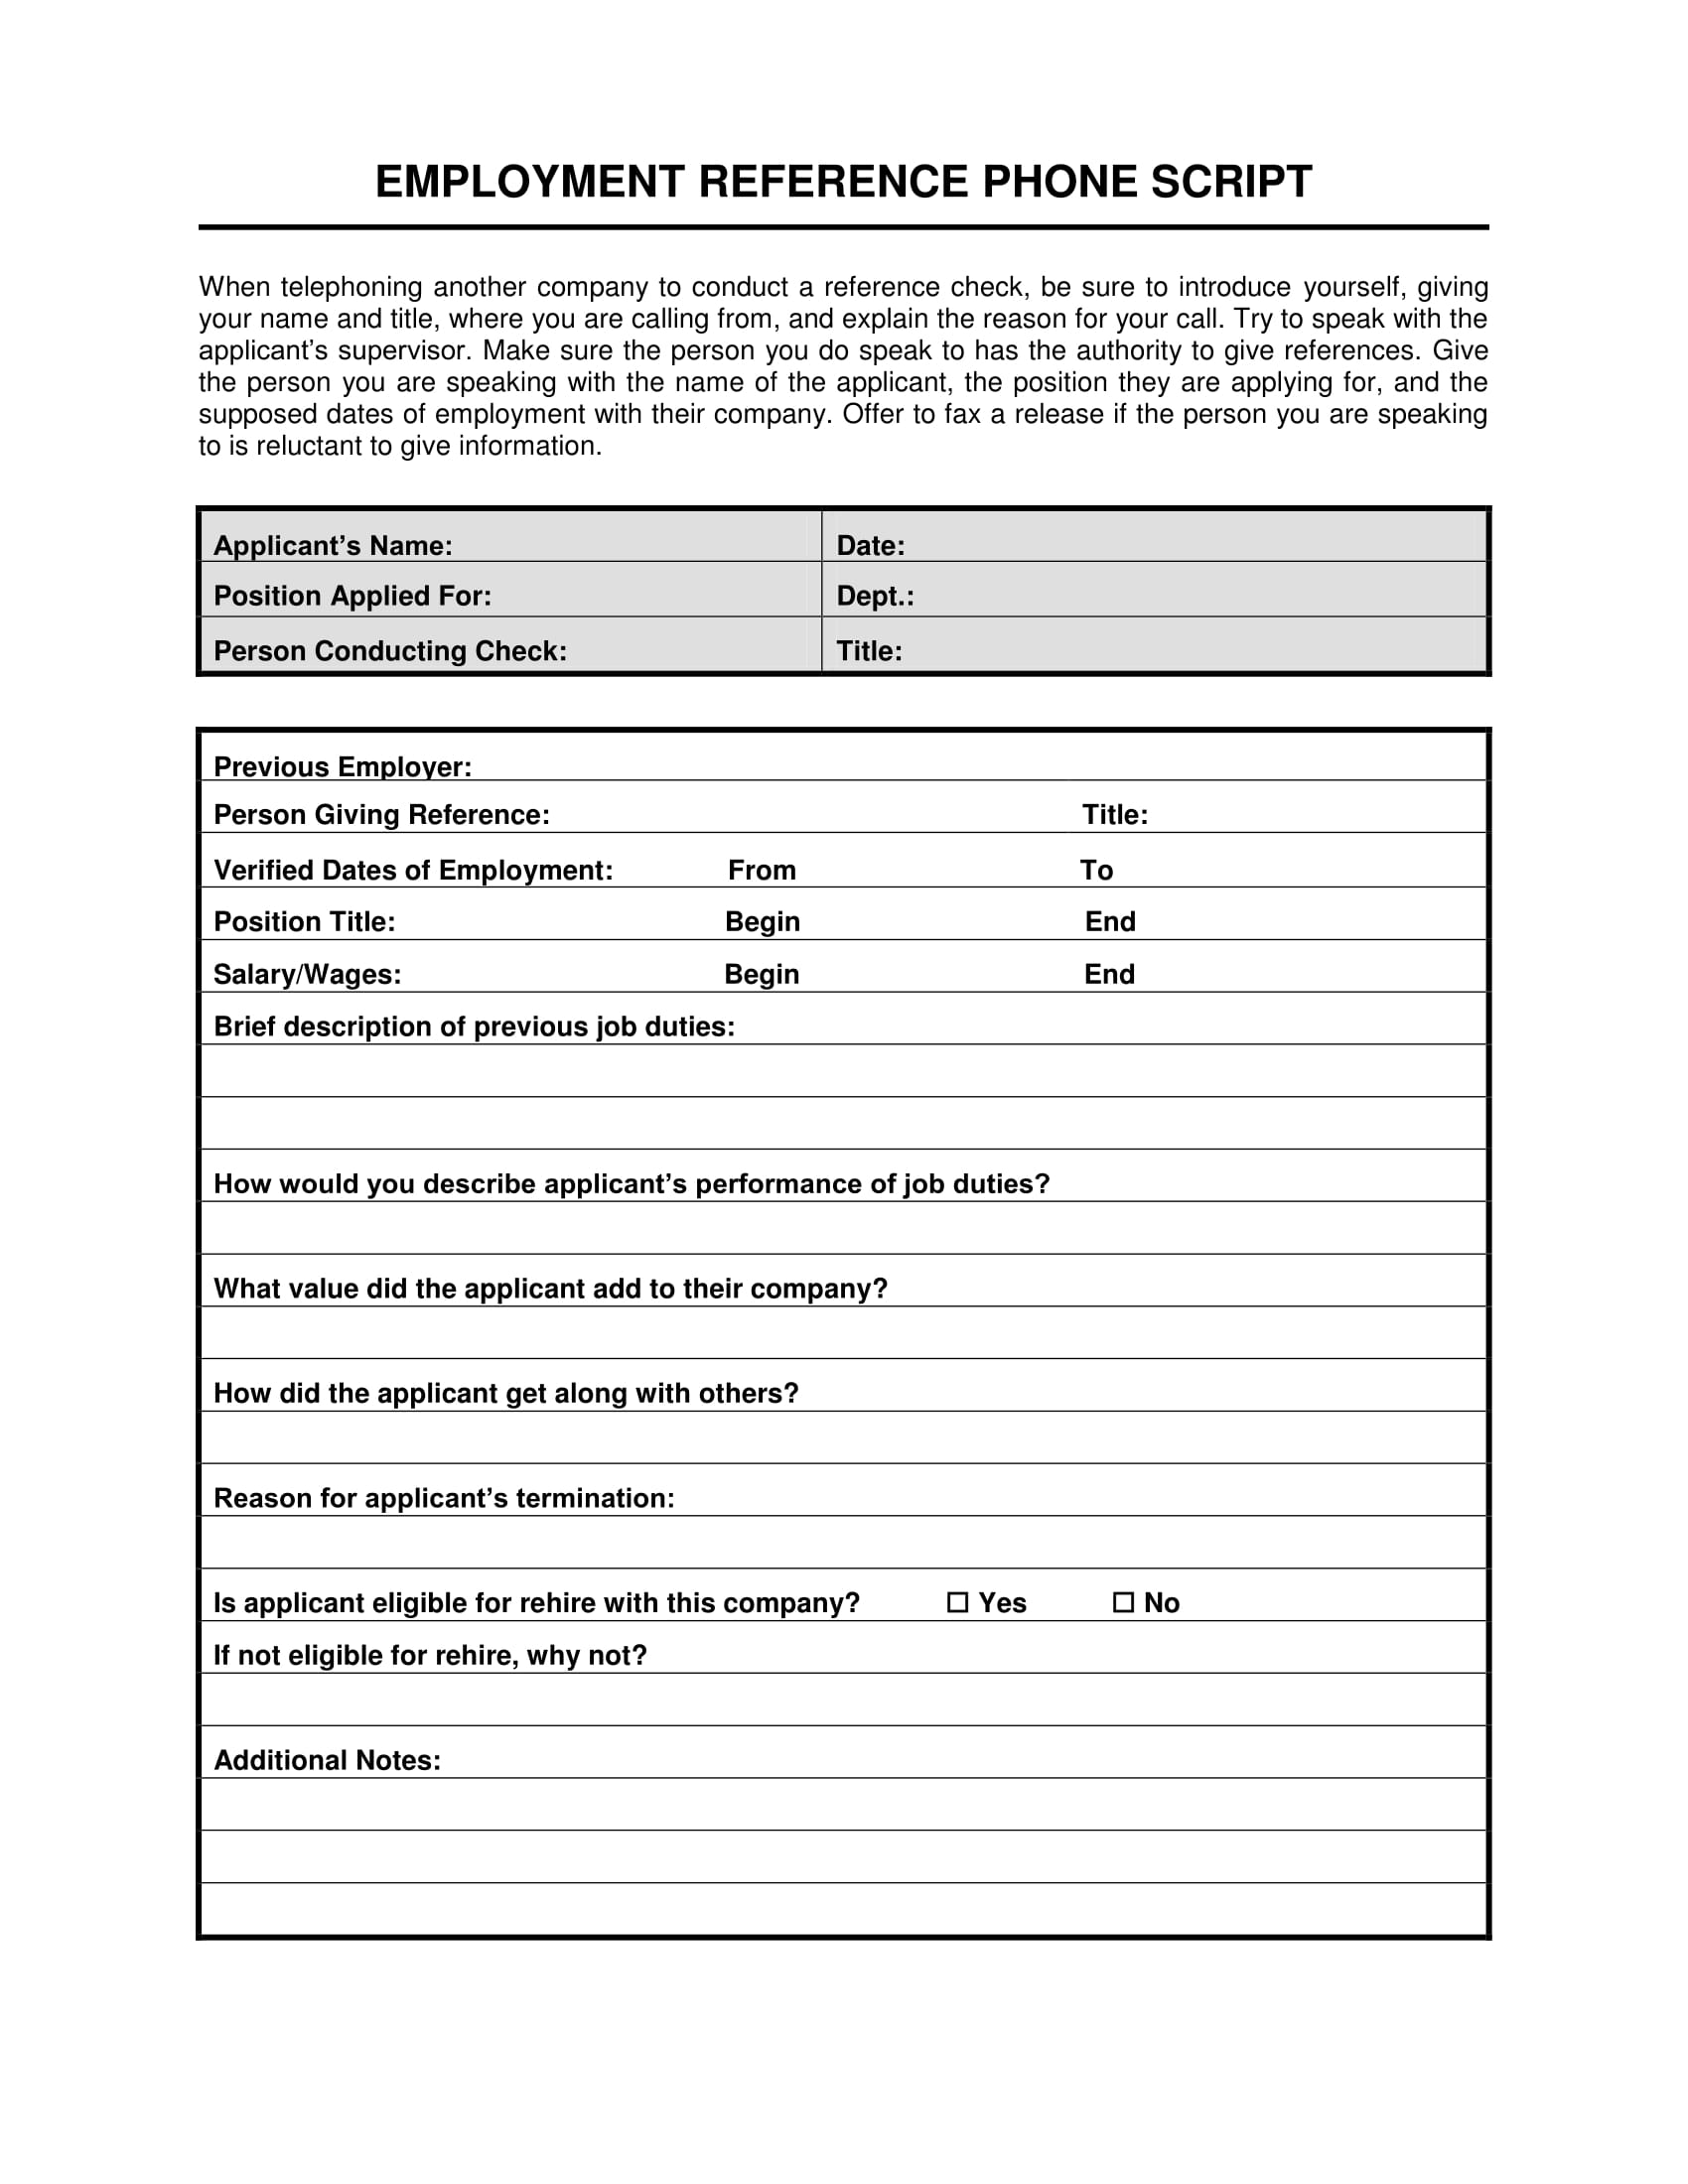 employment reference phone script form 1